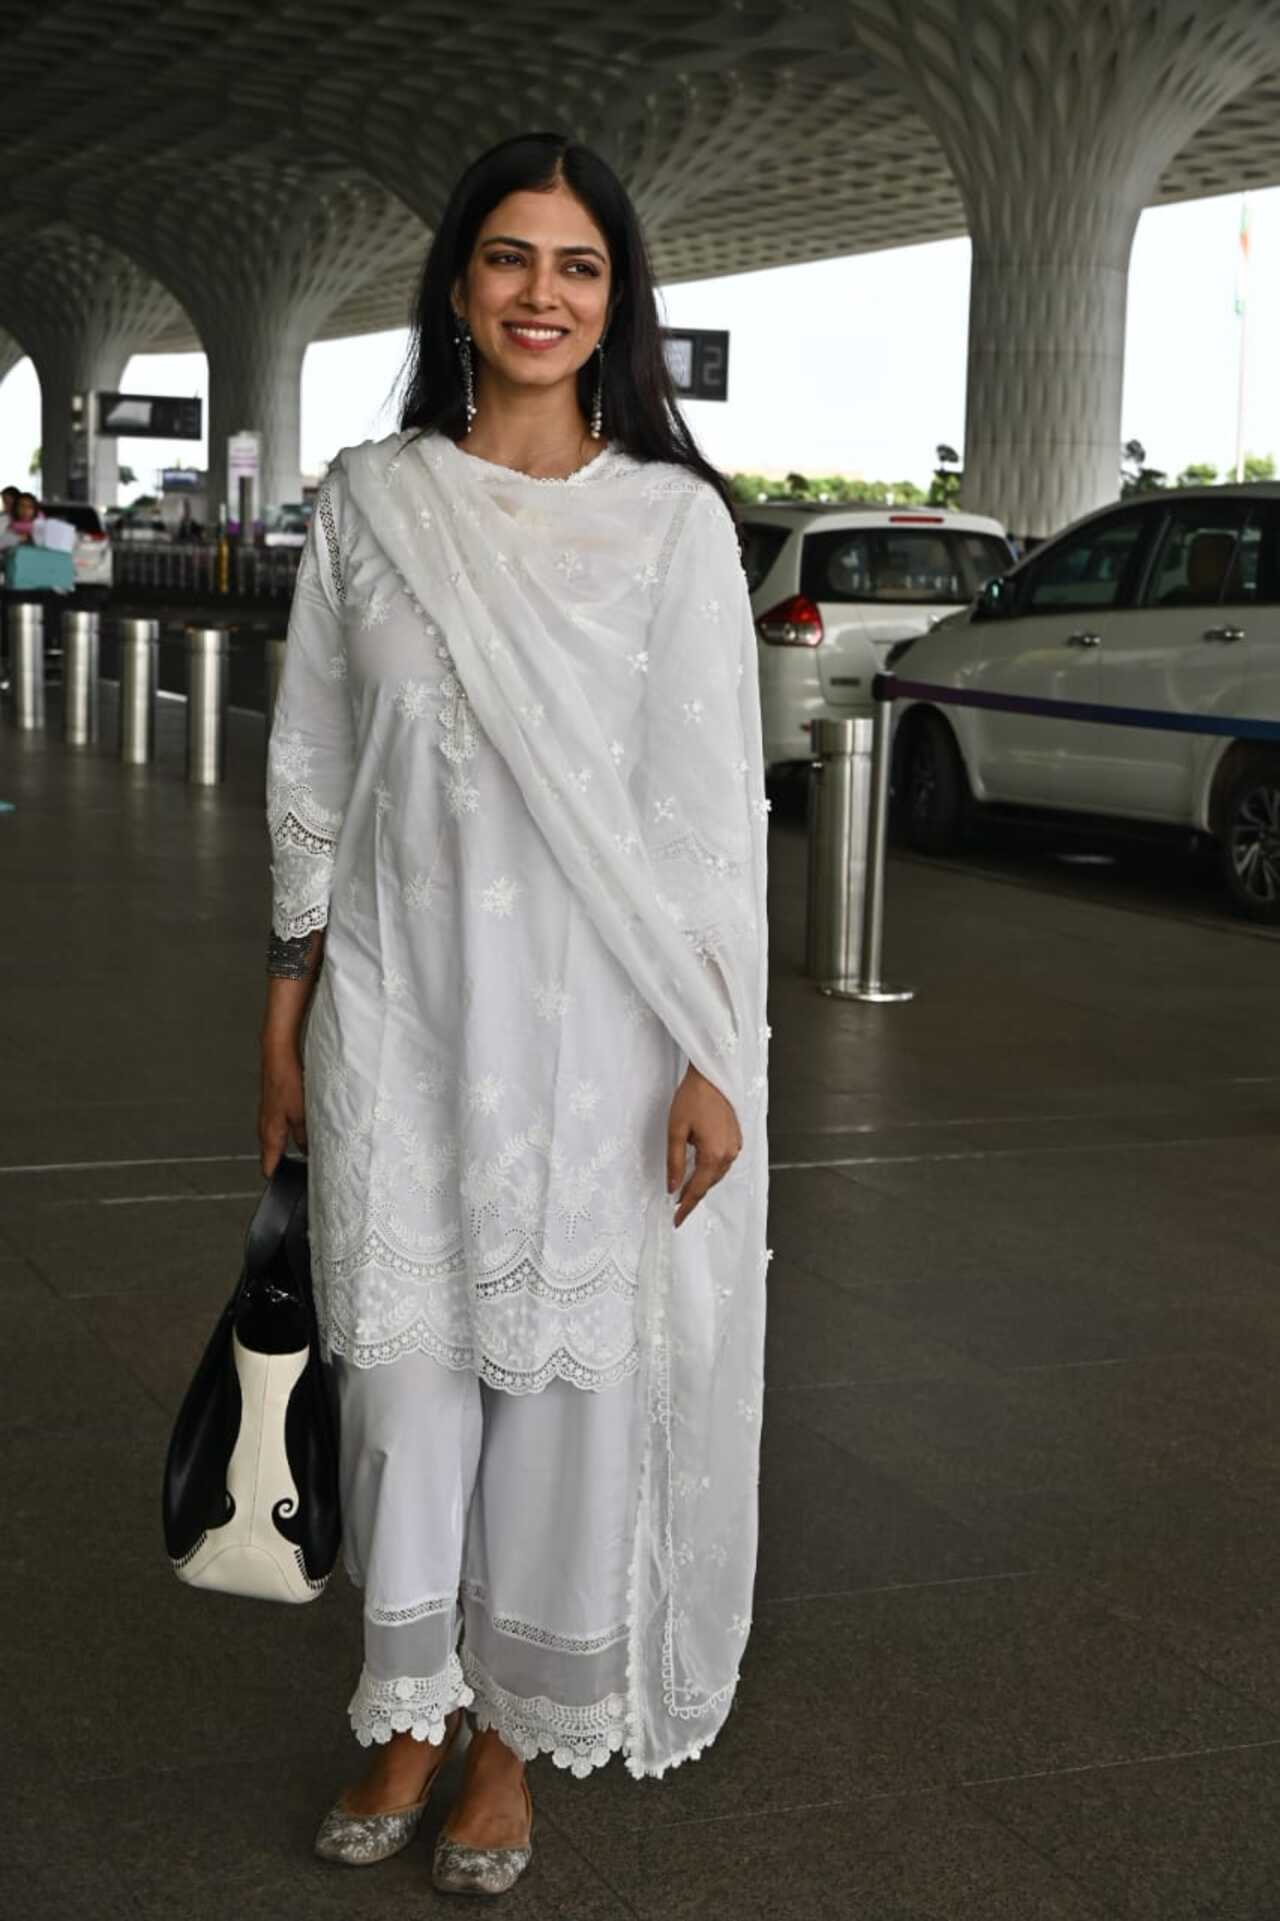 Malavika Mohanan looked pretty in white at the airport